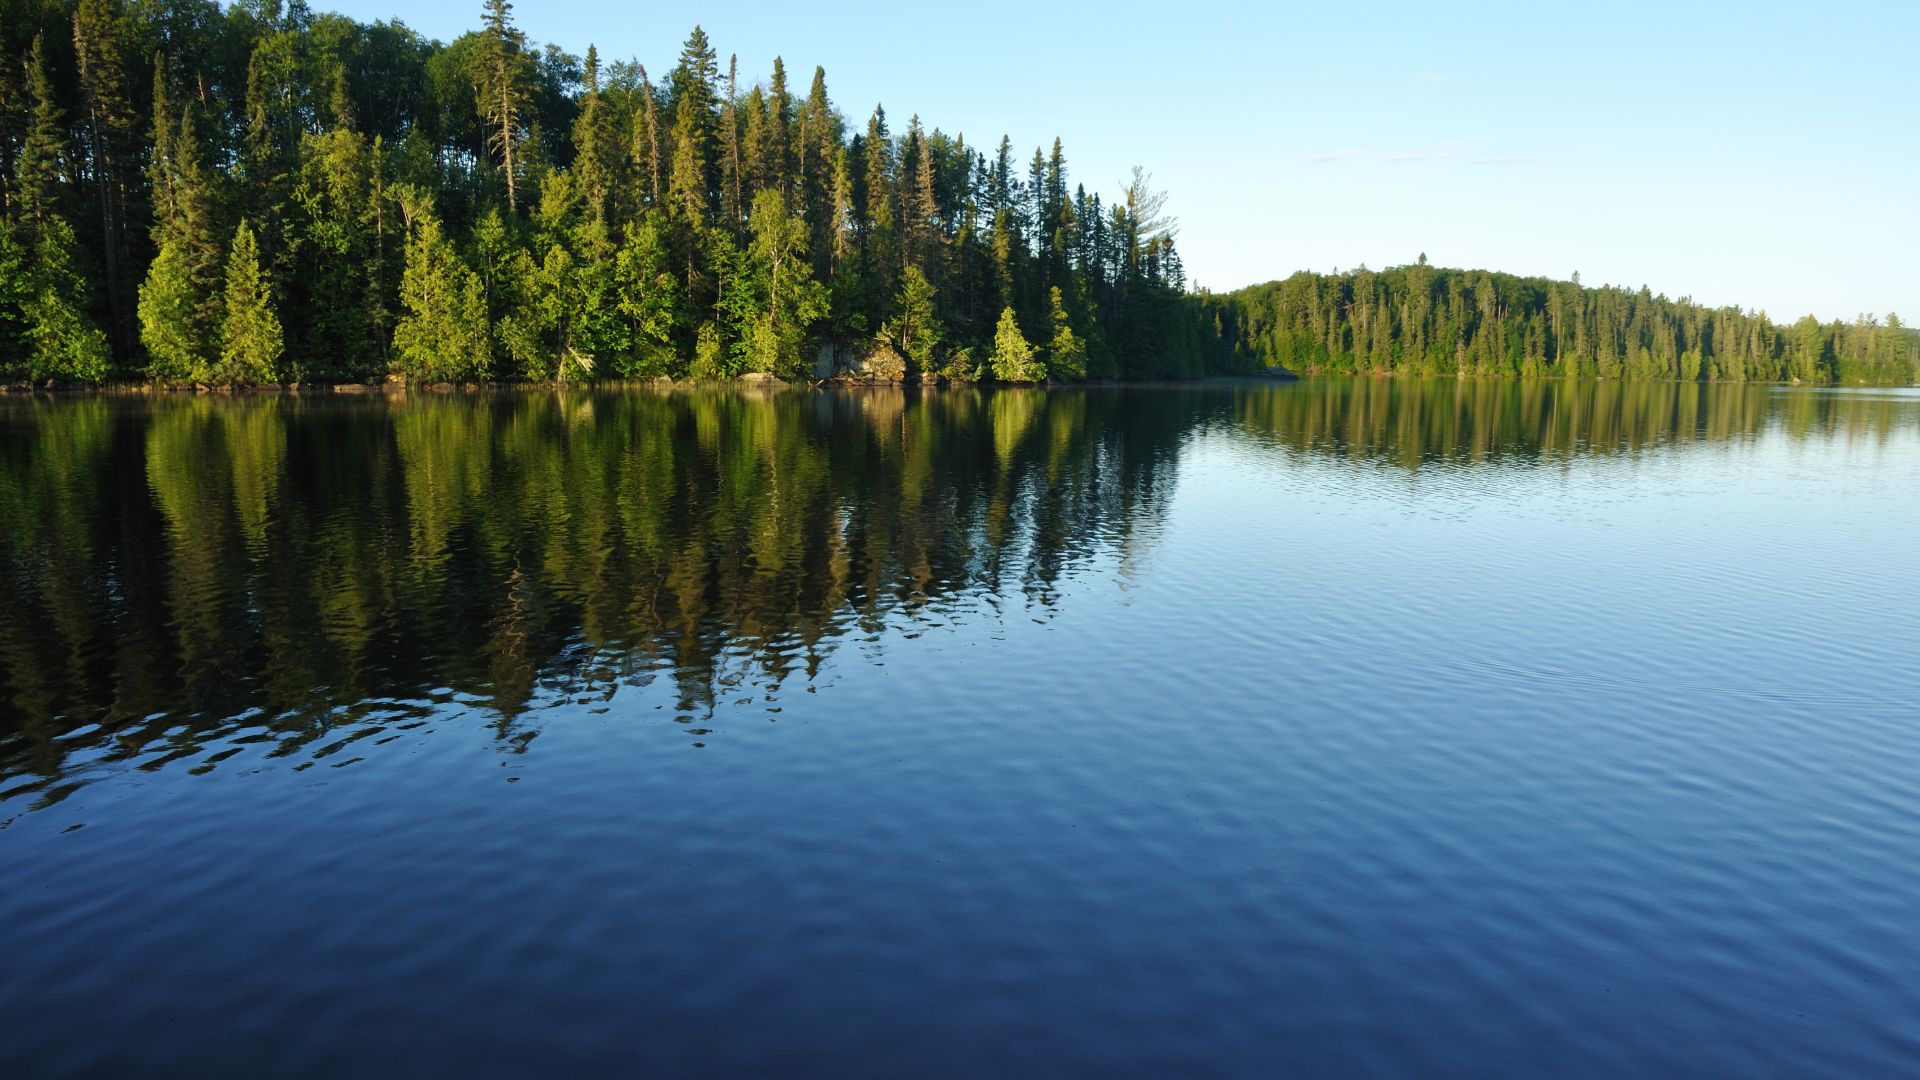 A Large Body Of Water Surrounded By Trees